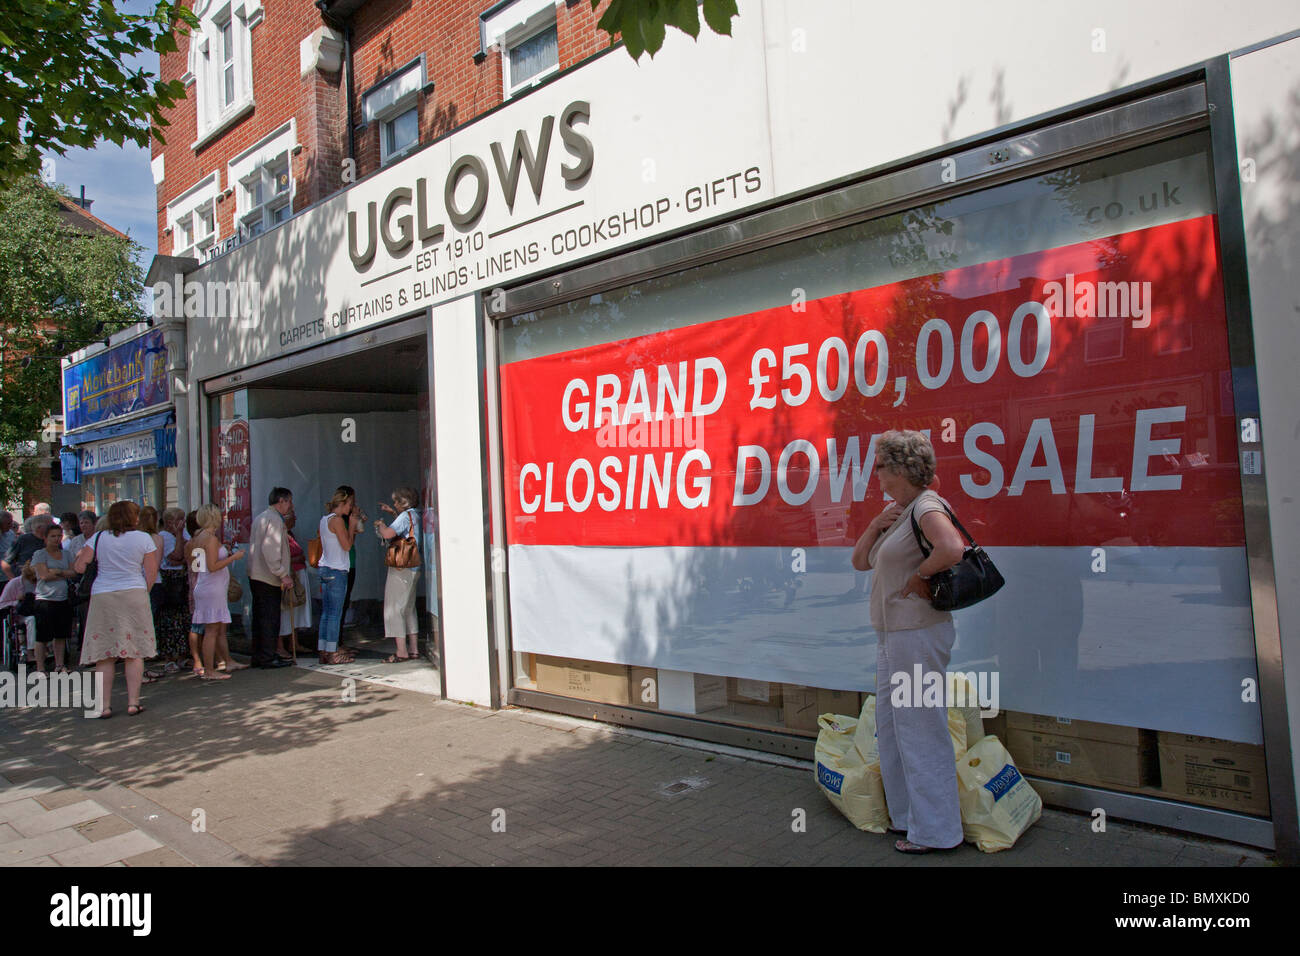 Uglows Grand closing down sale, Chingford, Waltham Forest, London GB UK Stock Photo